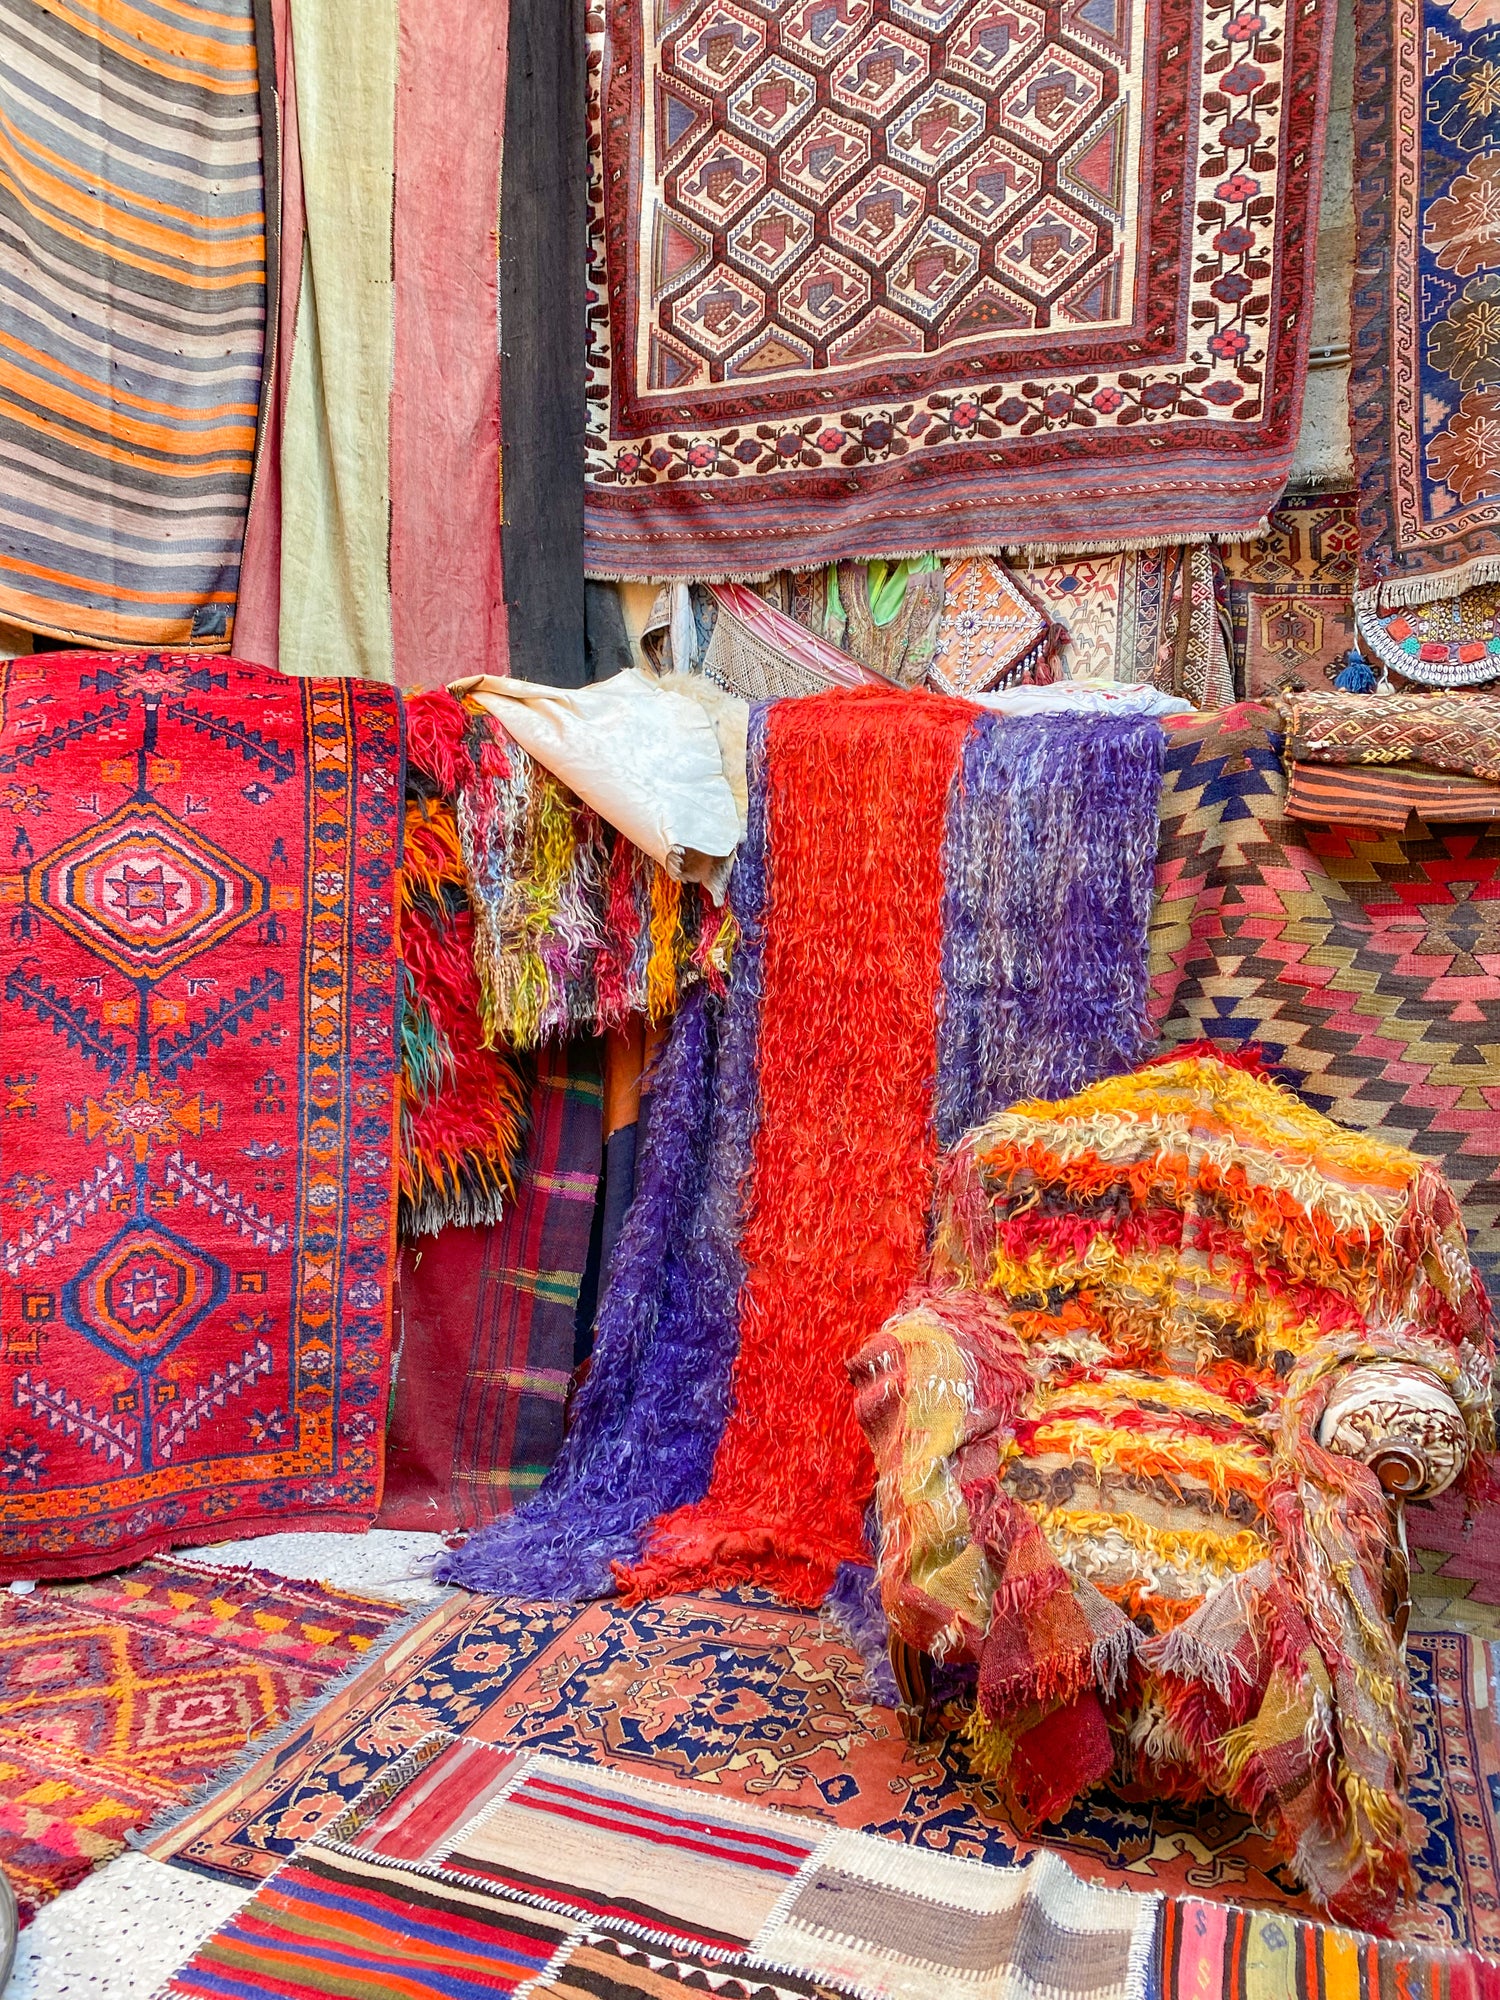 Colorful and bright Turkish rugs and area rugs displayed together